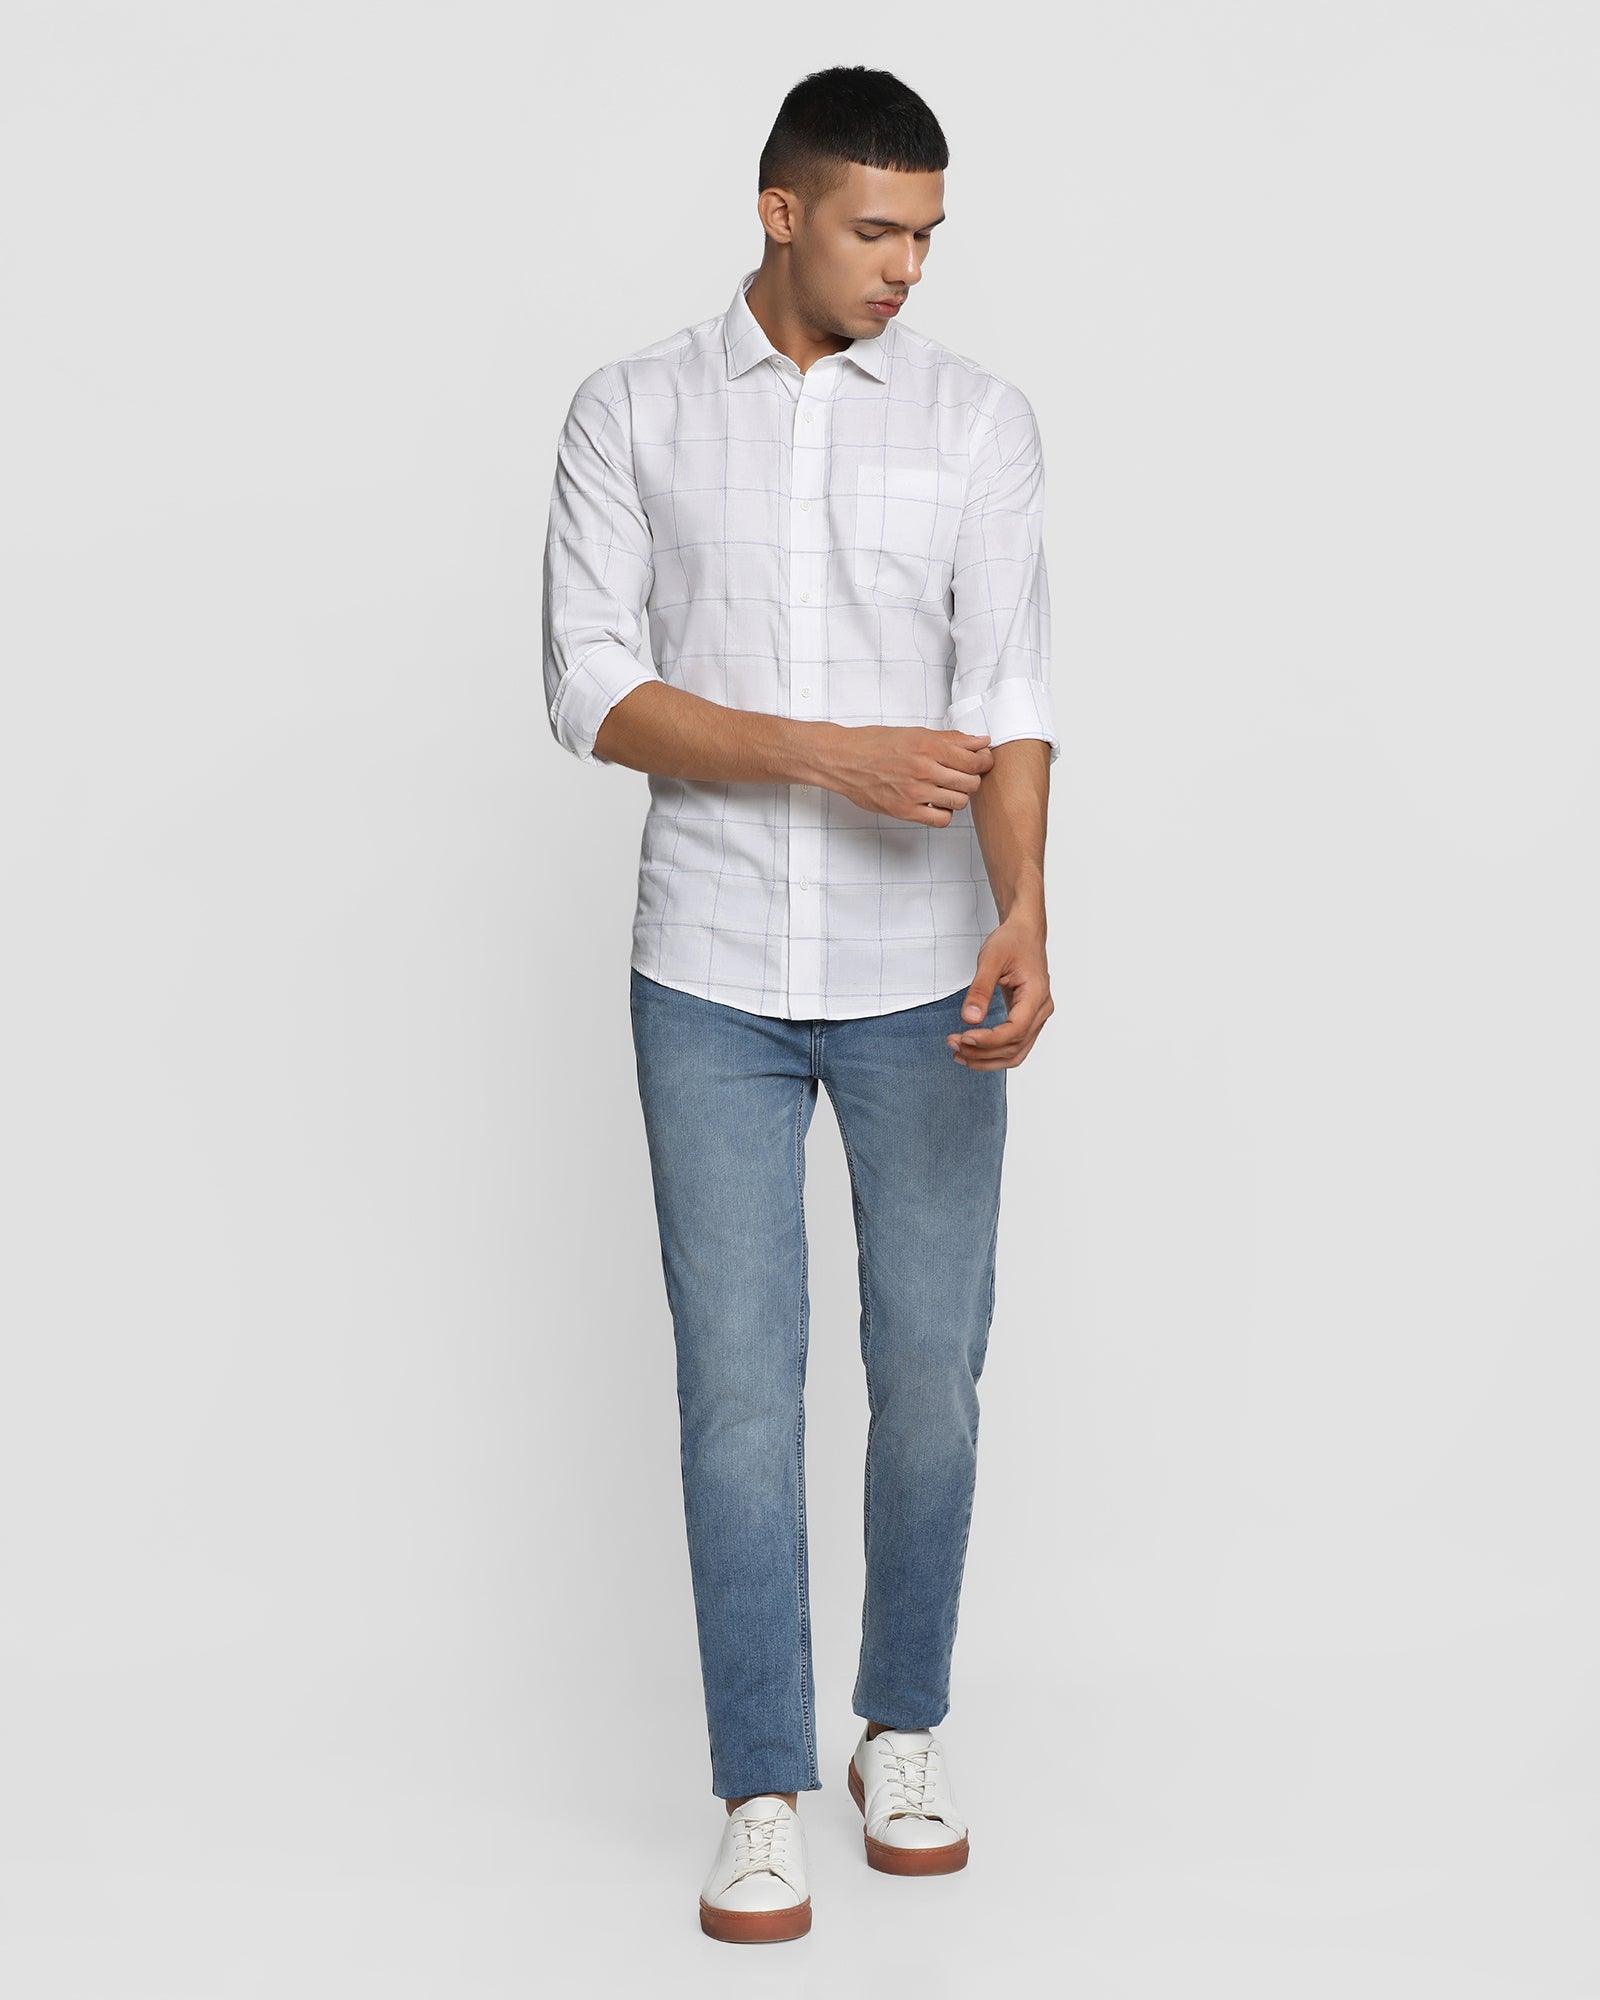 Mufti Menswear – Online Store for Men's Fashion Clothing